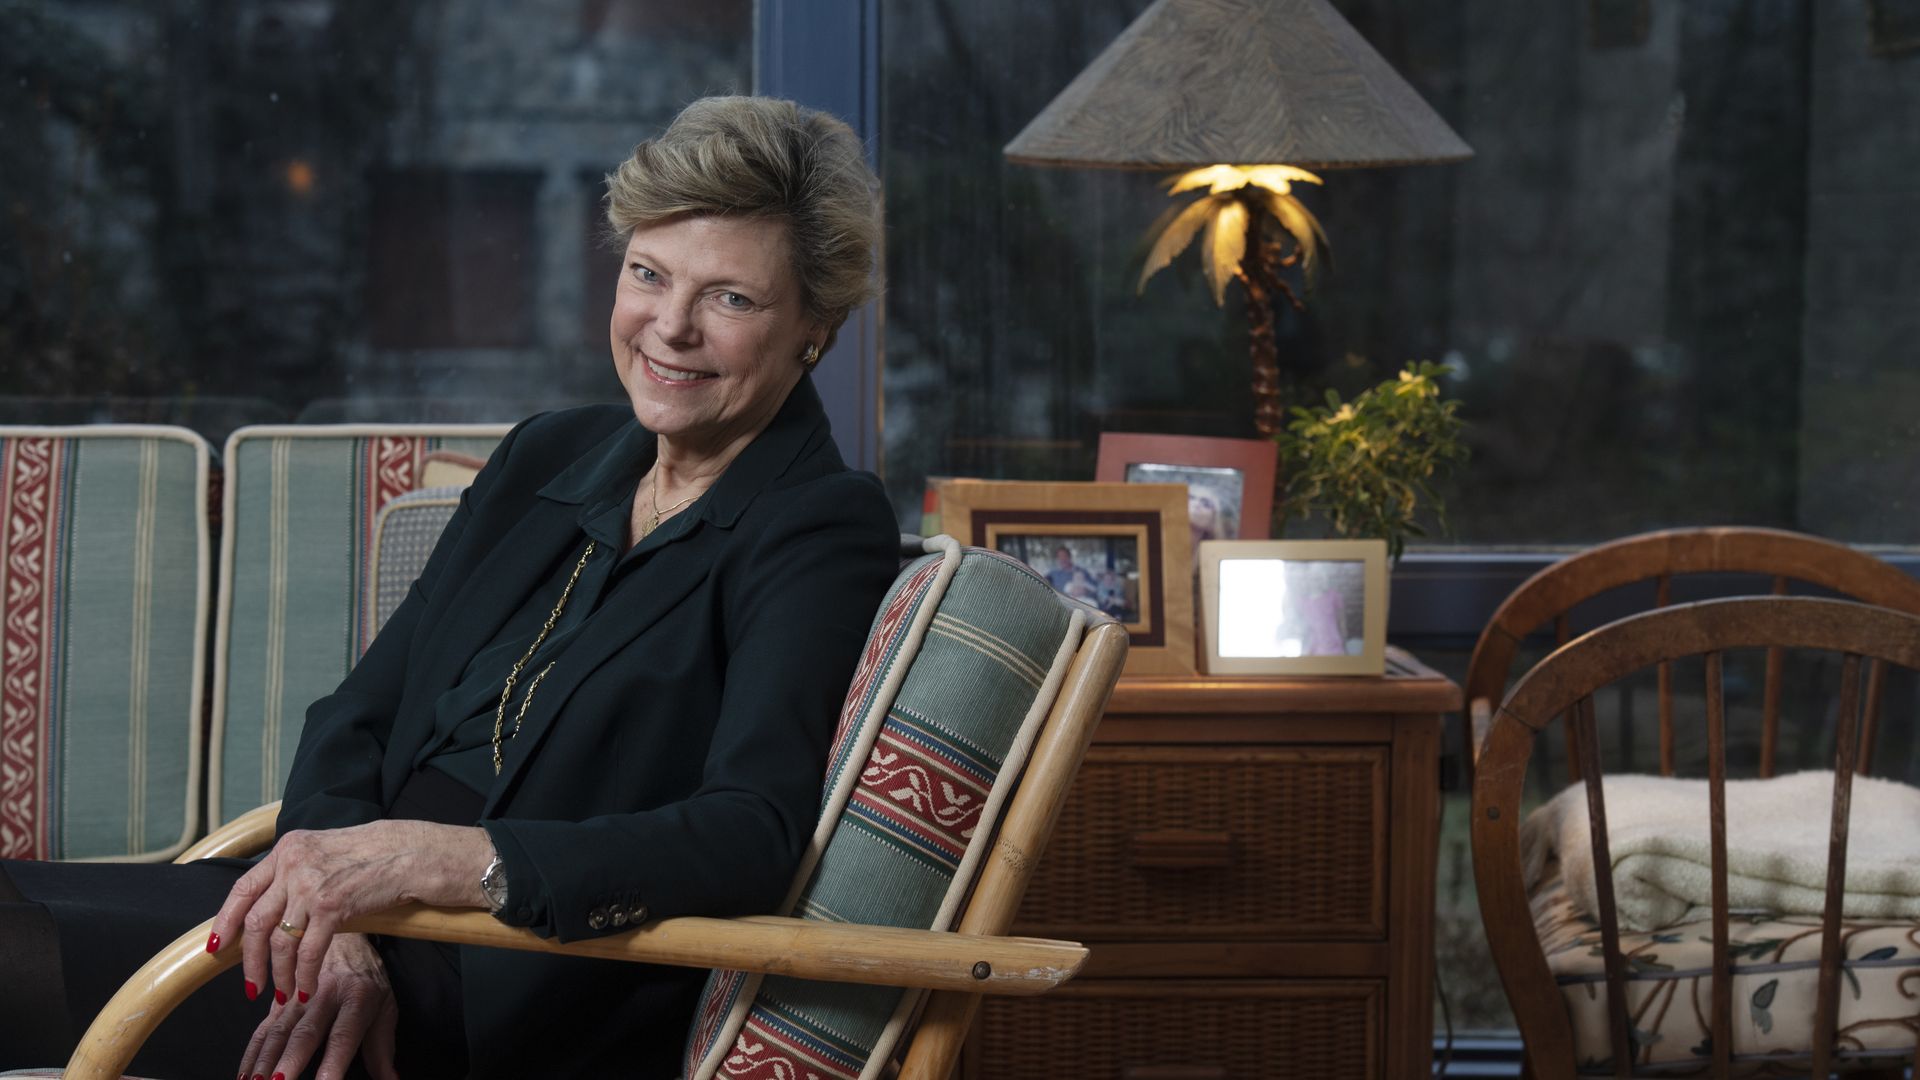 Journalist and author Cokie Roberts